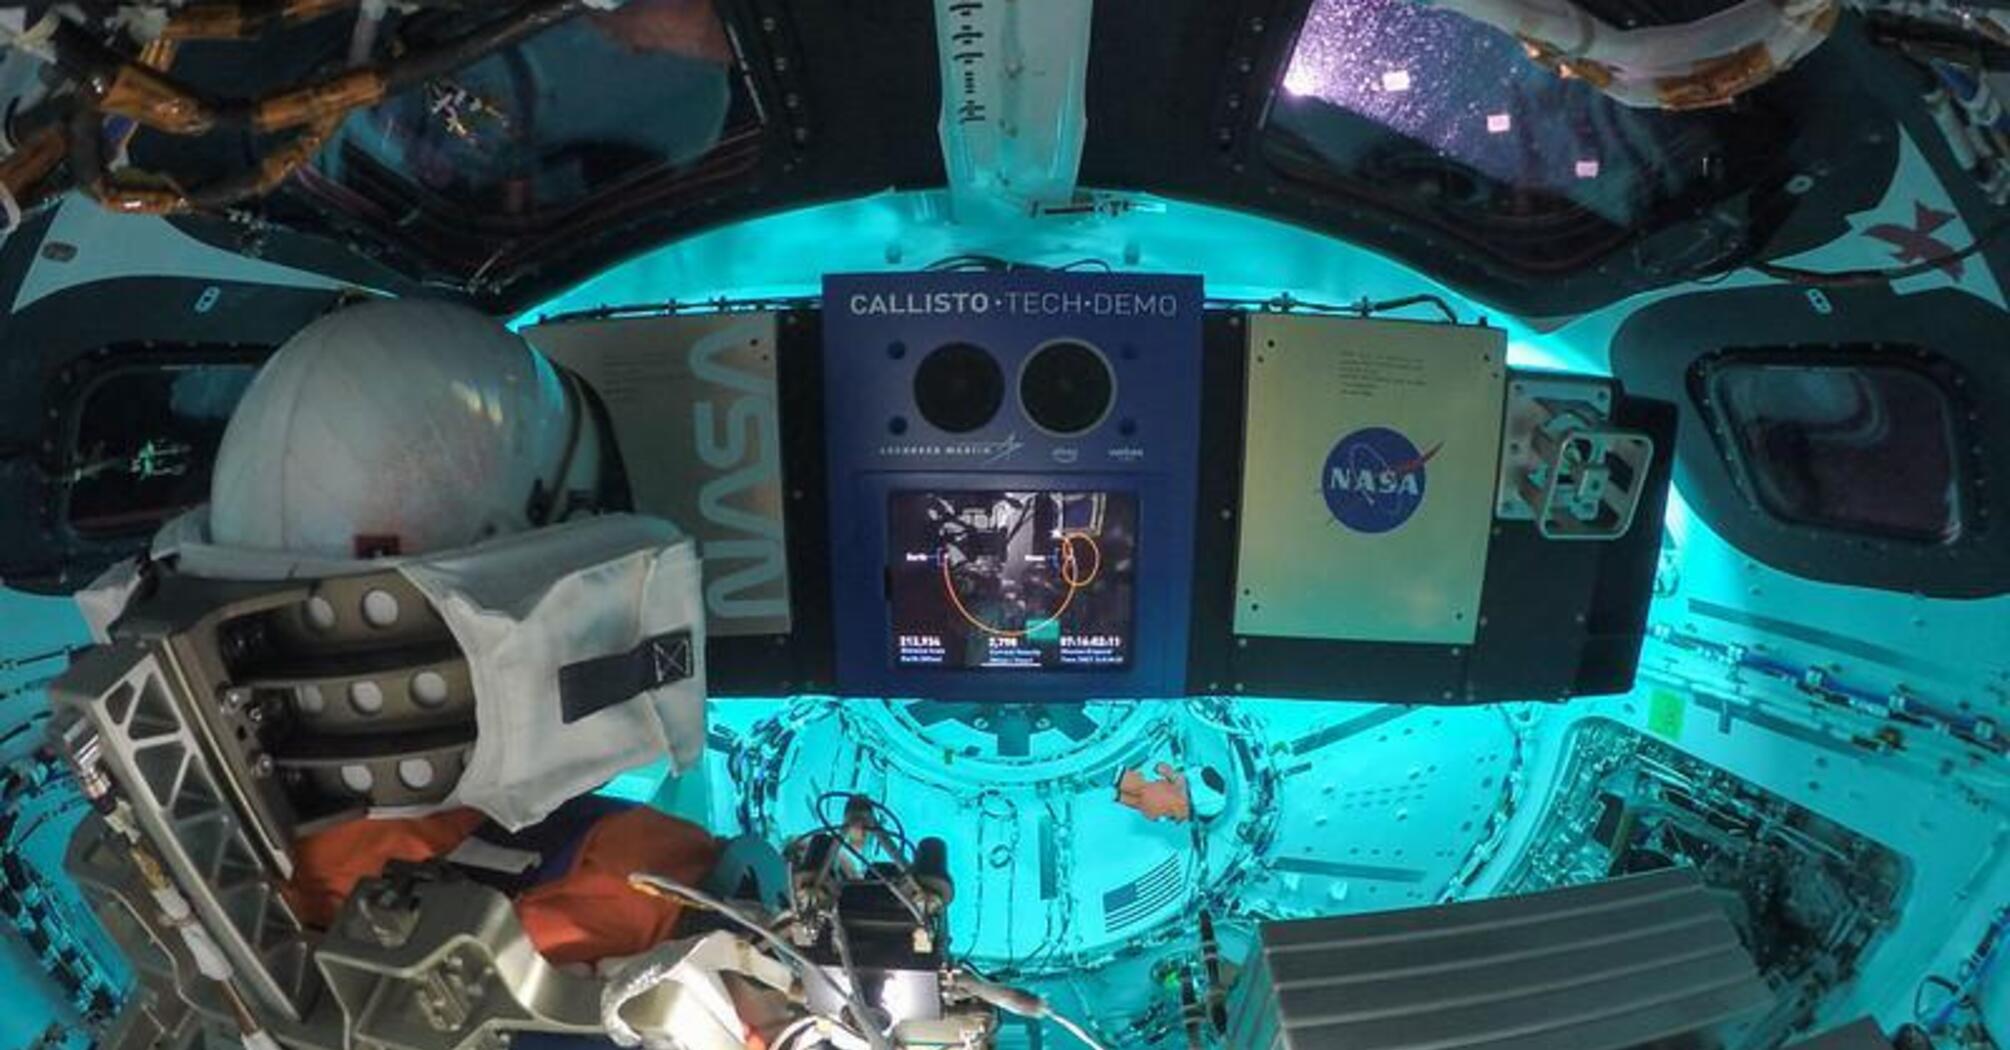 NASA shows the cockpit of the spacecraft in which astronauts will fly around the Moon